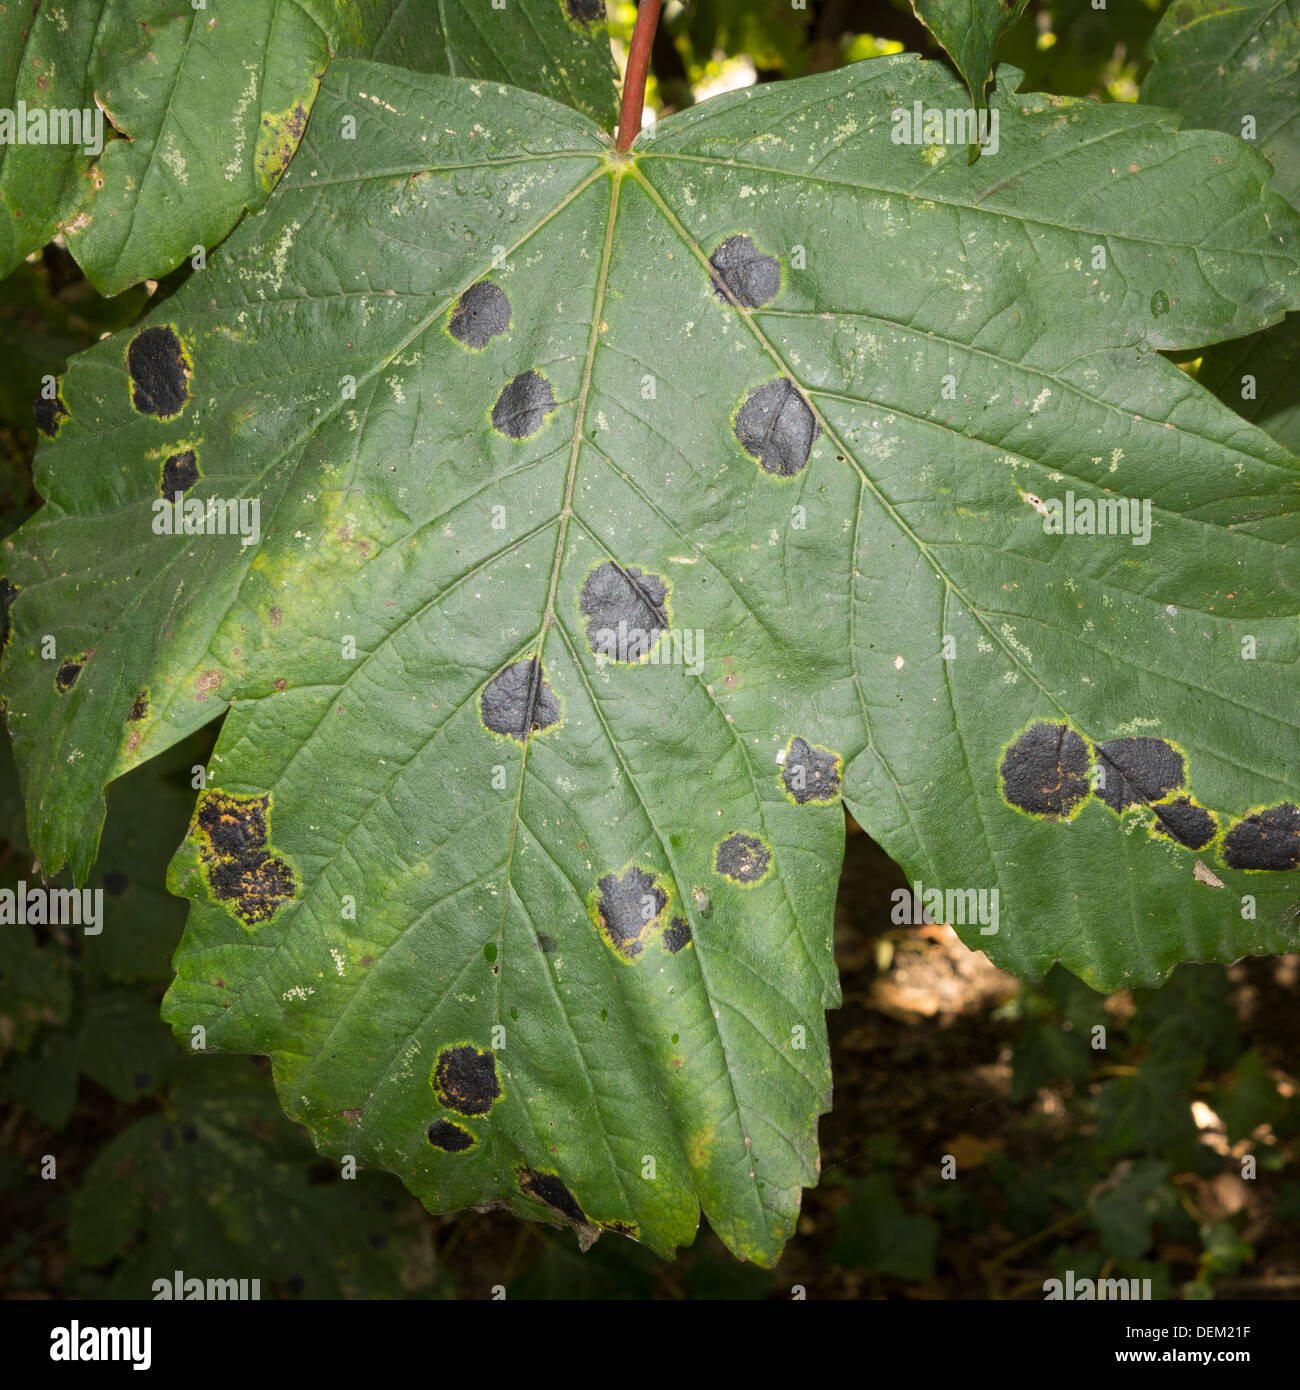 A maple-tree leaf with black blotches called 'tar spots' indicating infection. Stock Photo